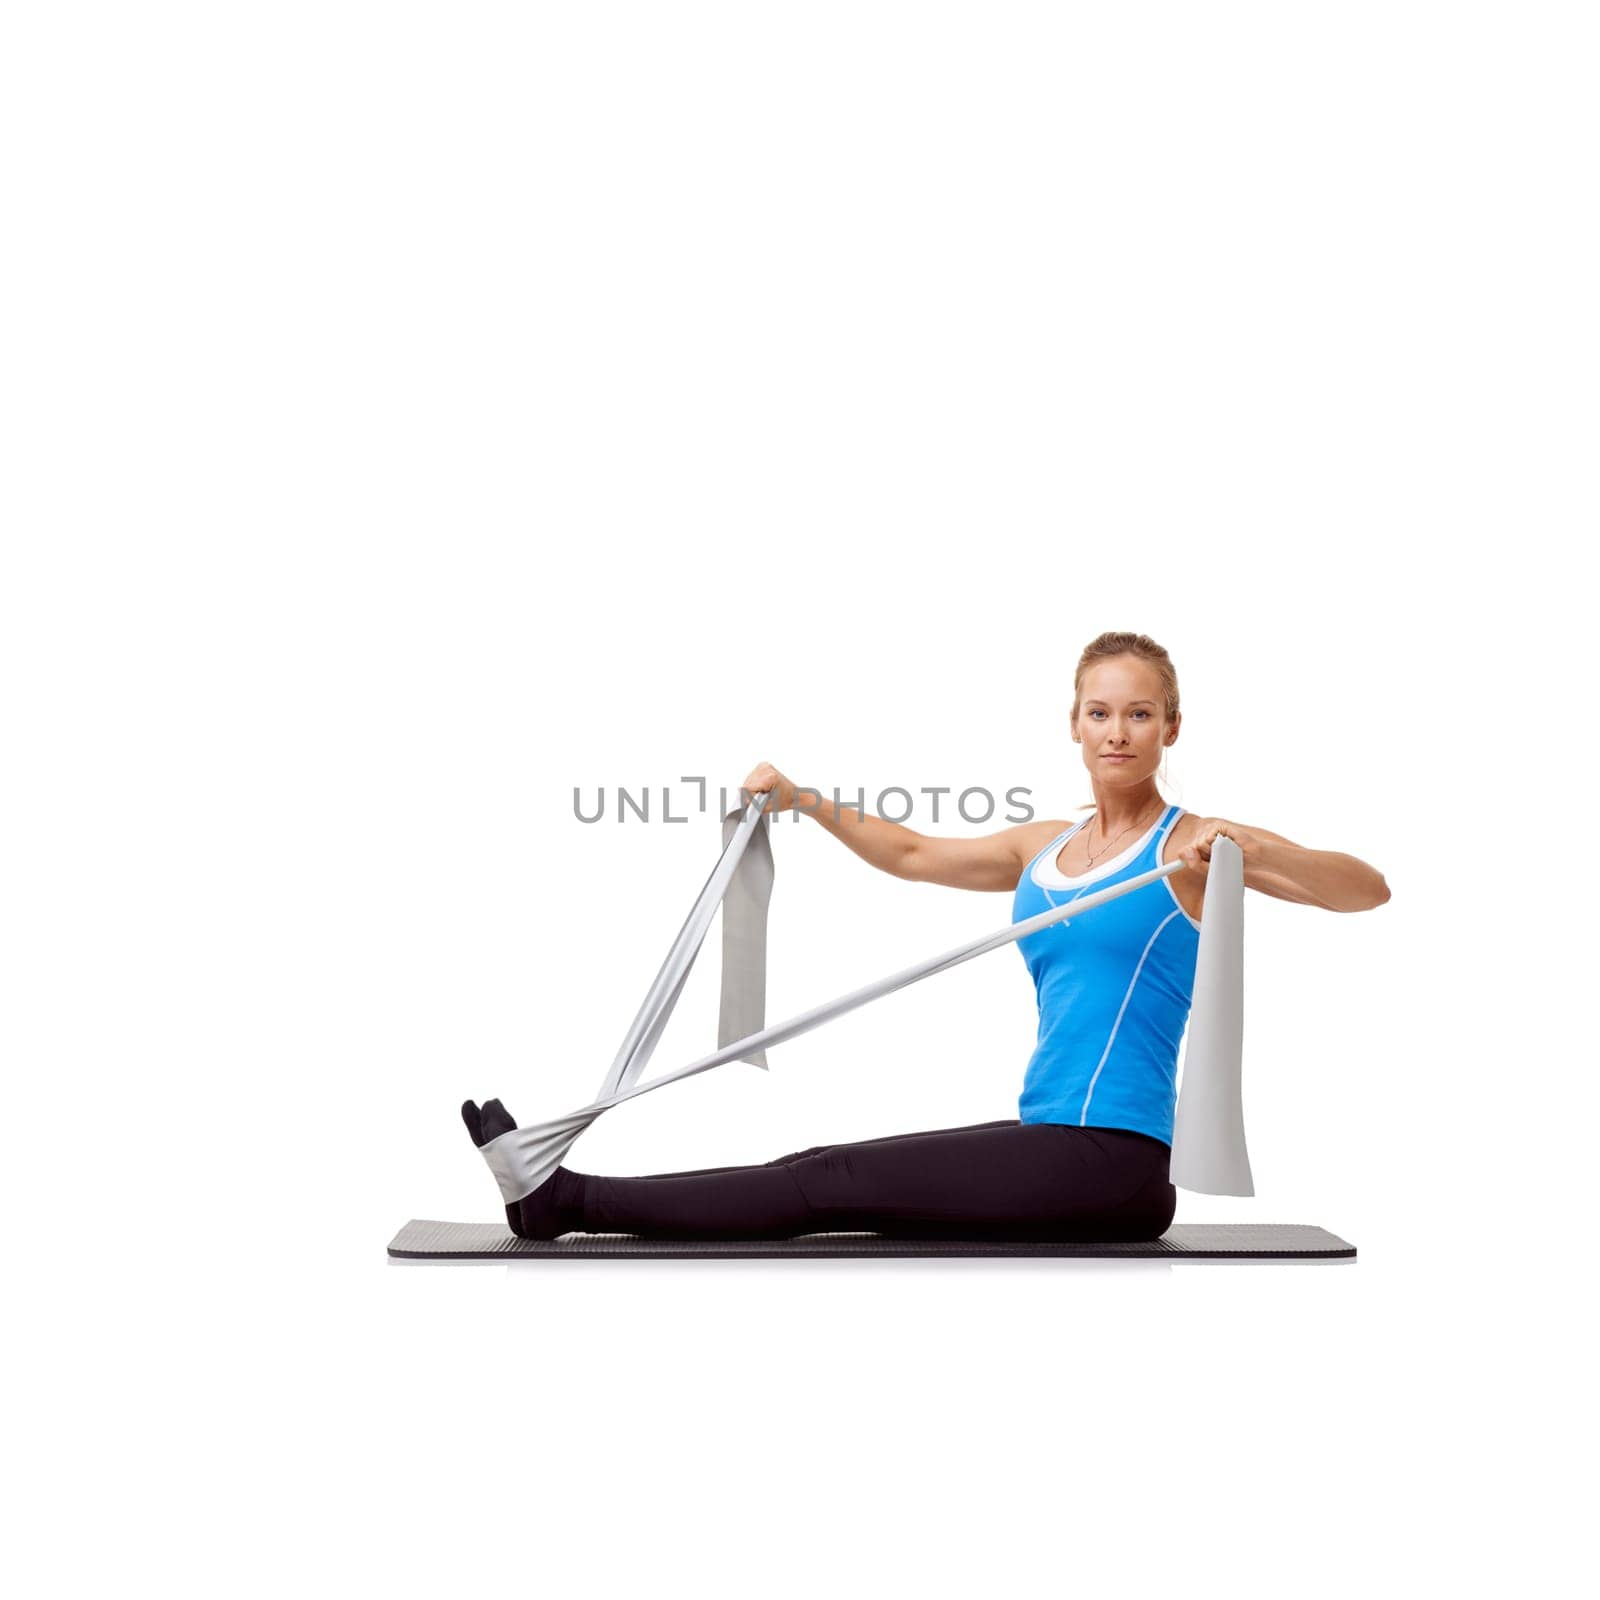 Sports, resistance band and portrait of woman doing exercise in studio for health, wellness and bodycare. Fitness, yoga mat and person from Canada with arm workout or training by white background